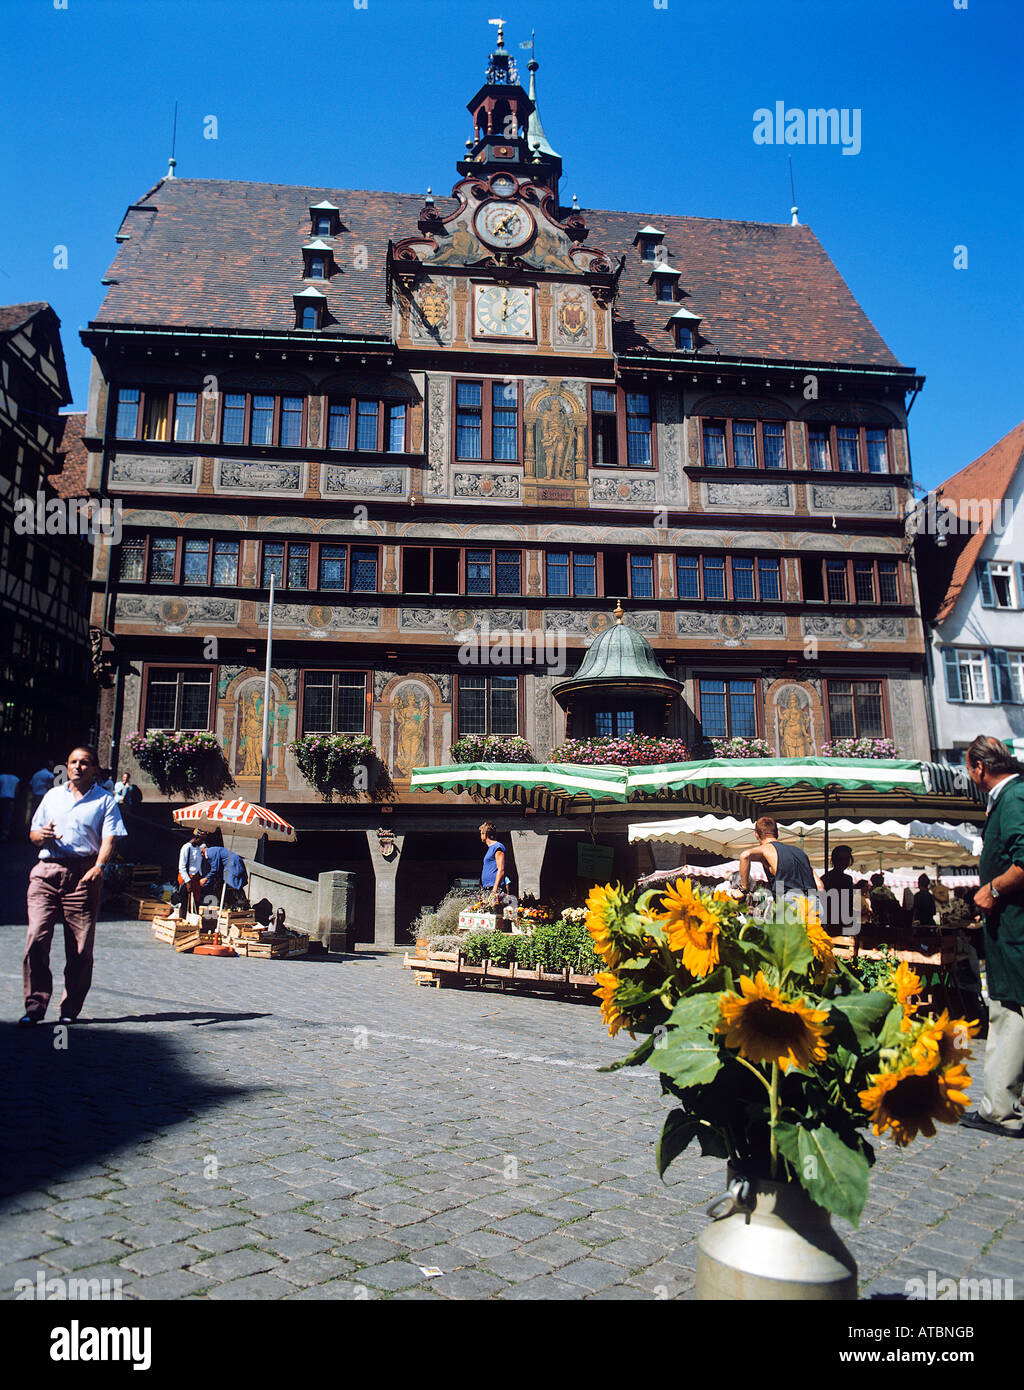 Viewed beyond a pot filled with large sunflowers in the central Marktplatz the much restored 15th century Rathaus Town Hall in the town of Tubingen Stock Photo